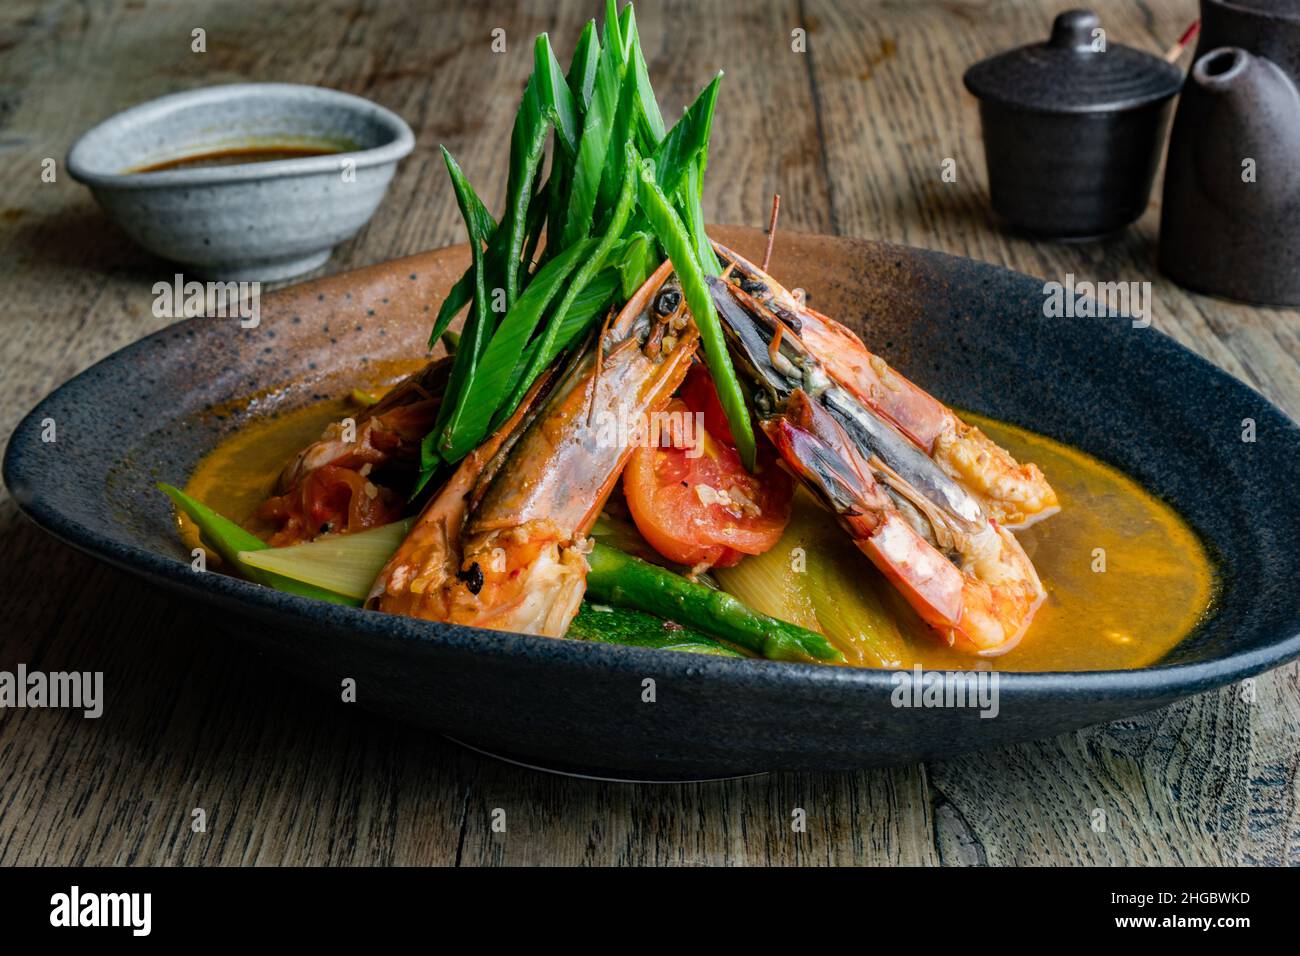 Japanese dish with shrimps, prawns, lobster and other seafood, topped with leeks. Stock Photo